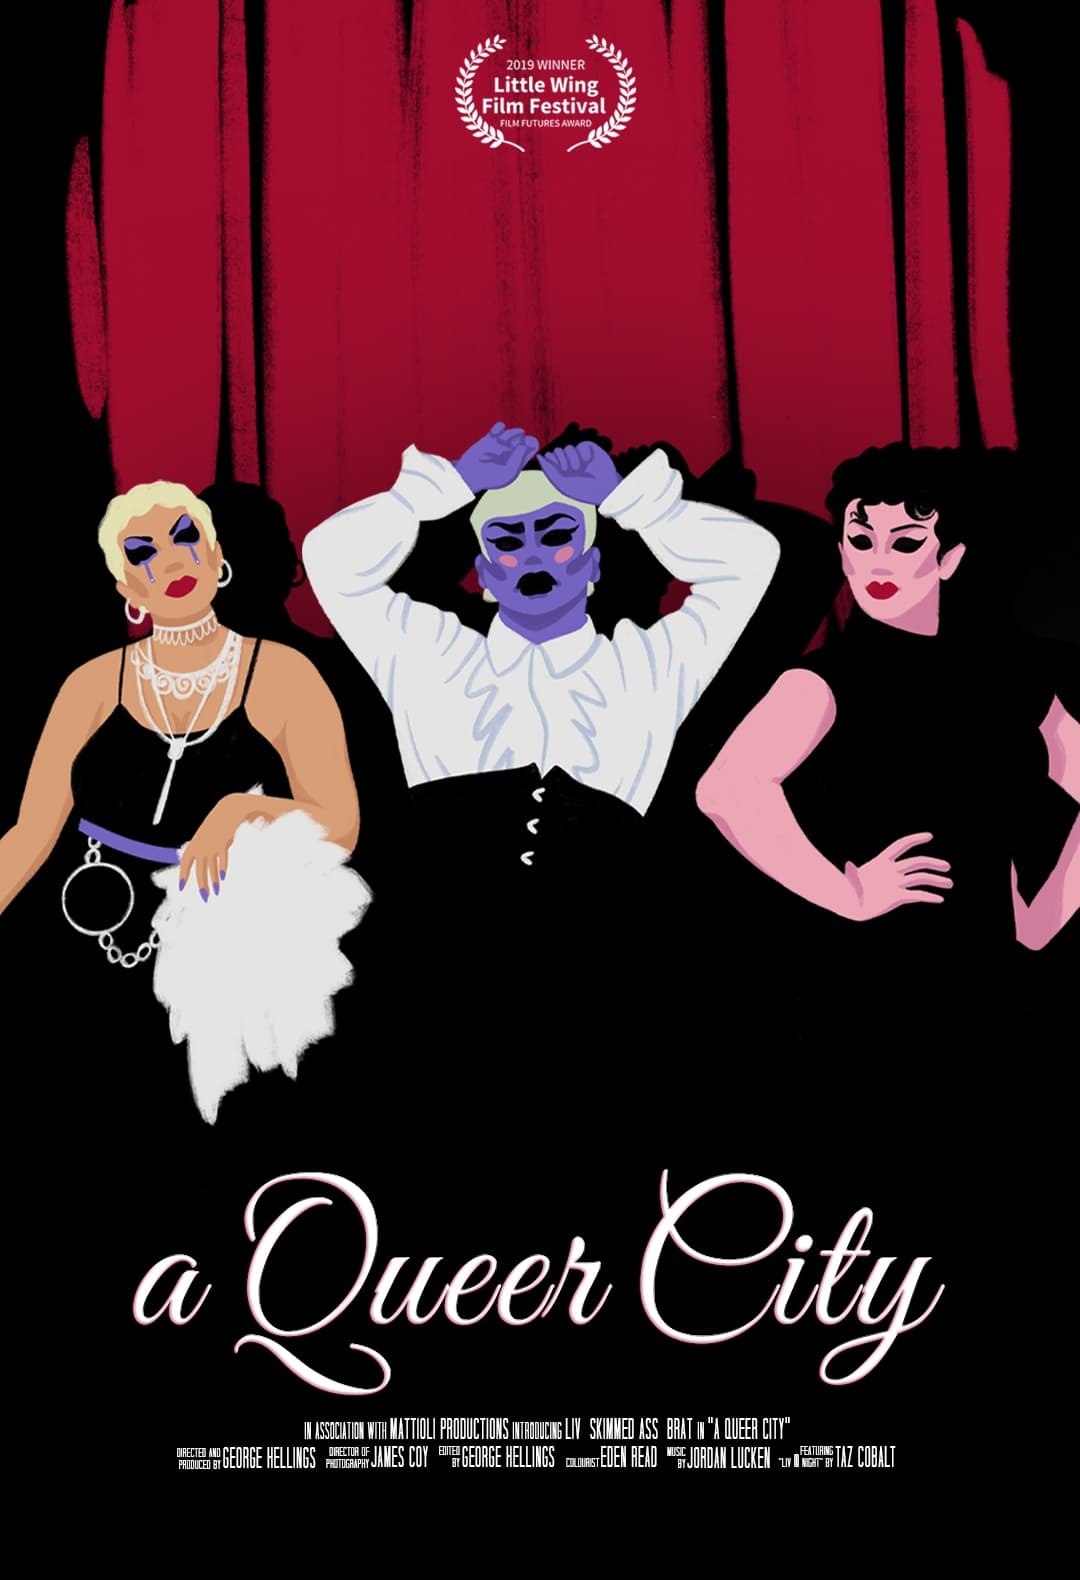 A Queer City